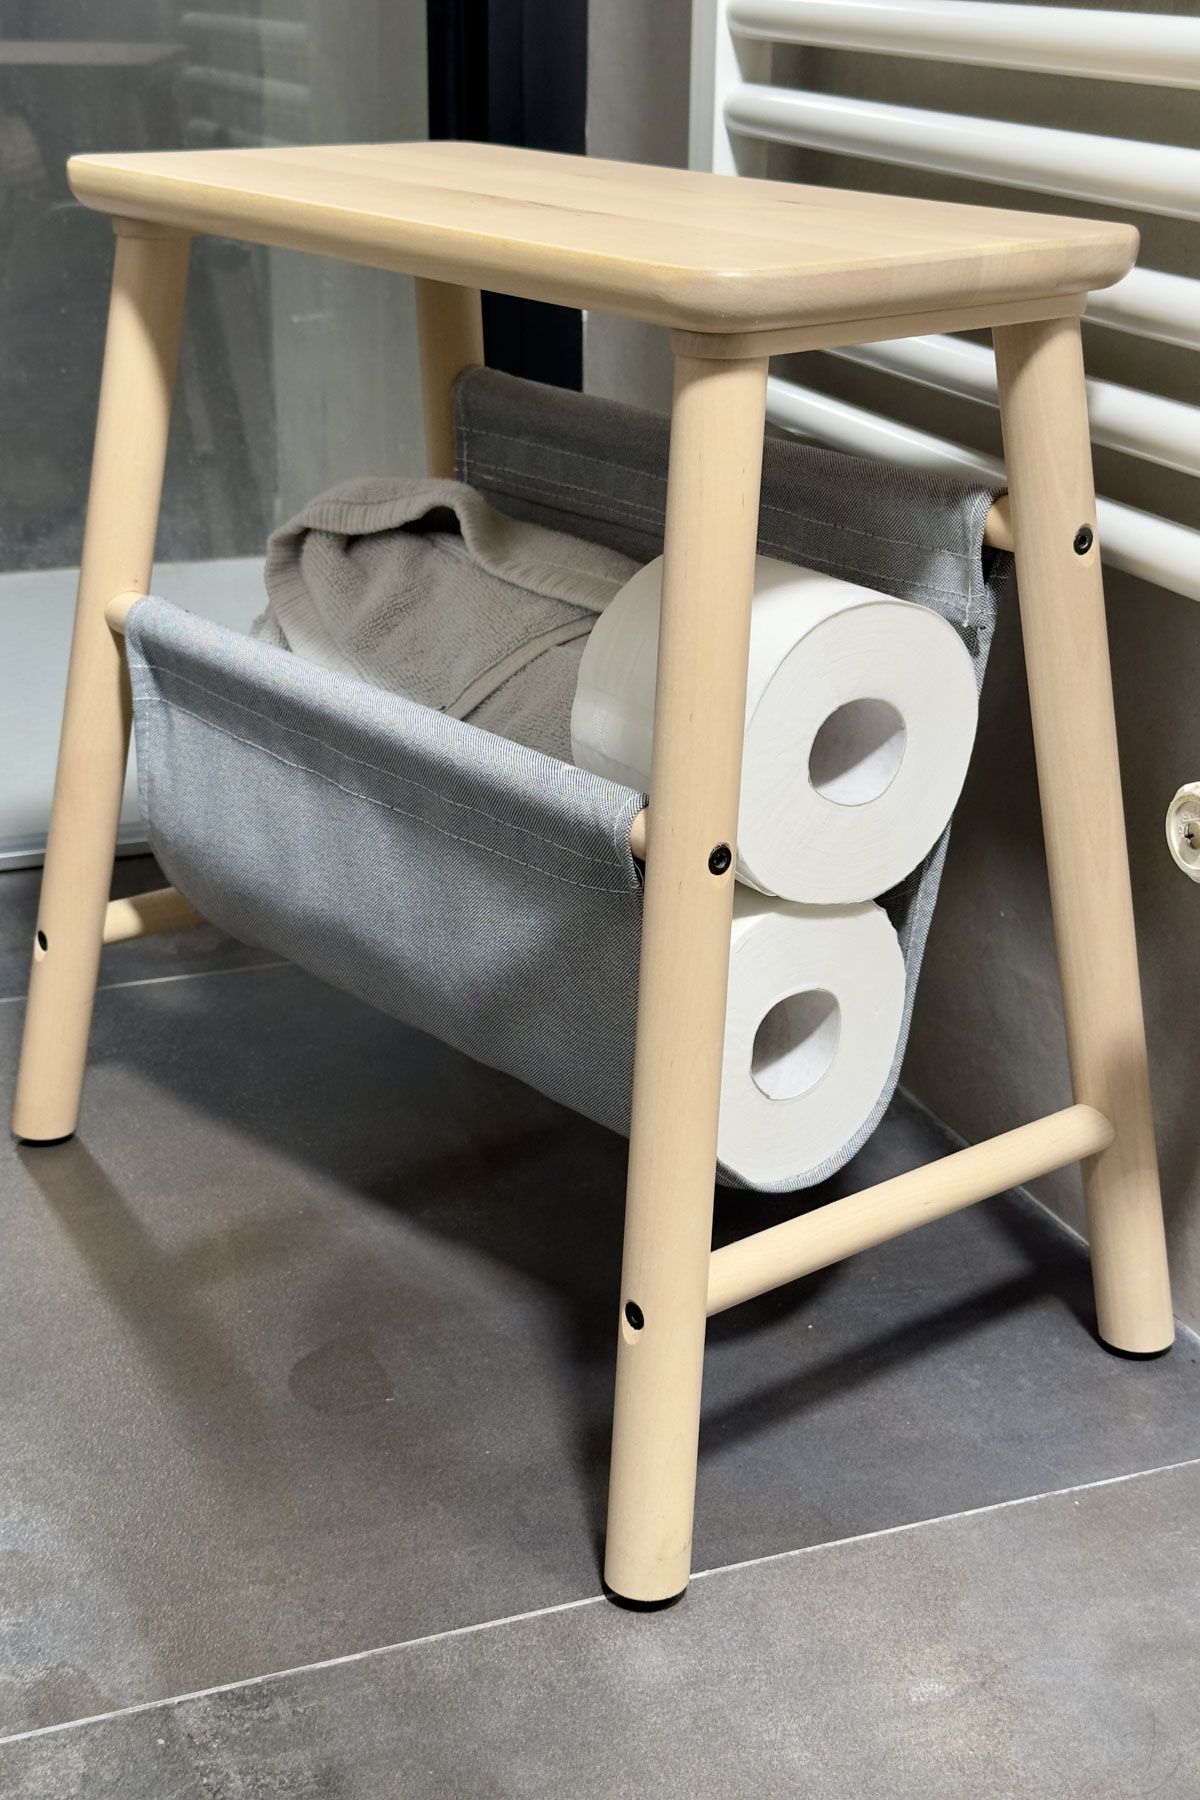 Use A Stool To Store Towels And Toilet Paper